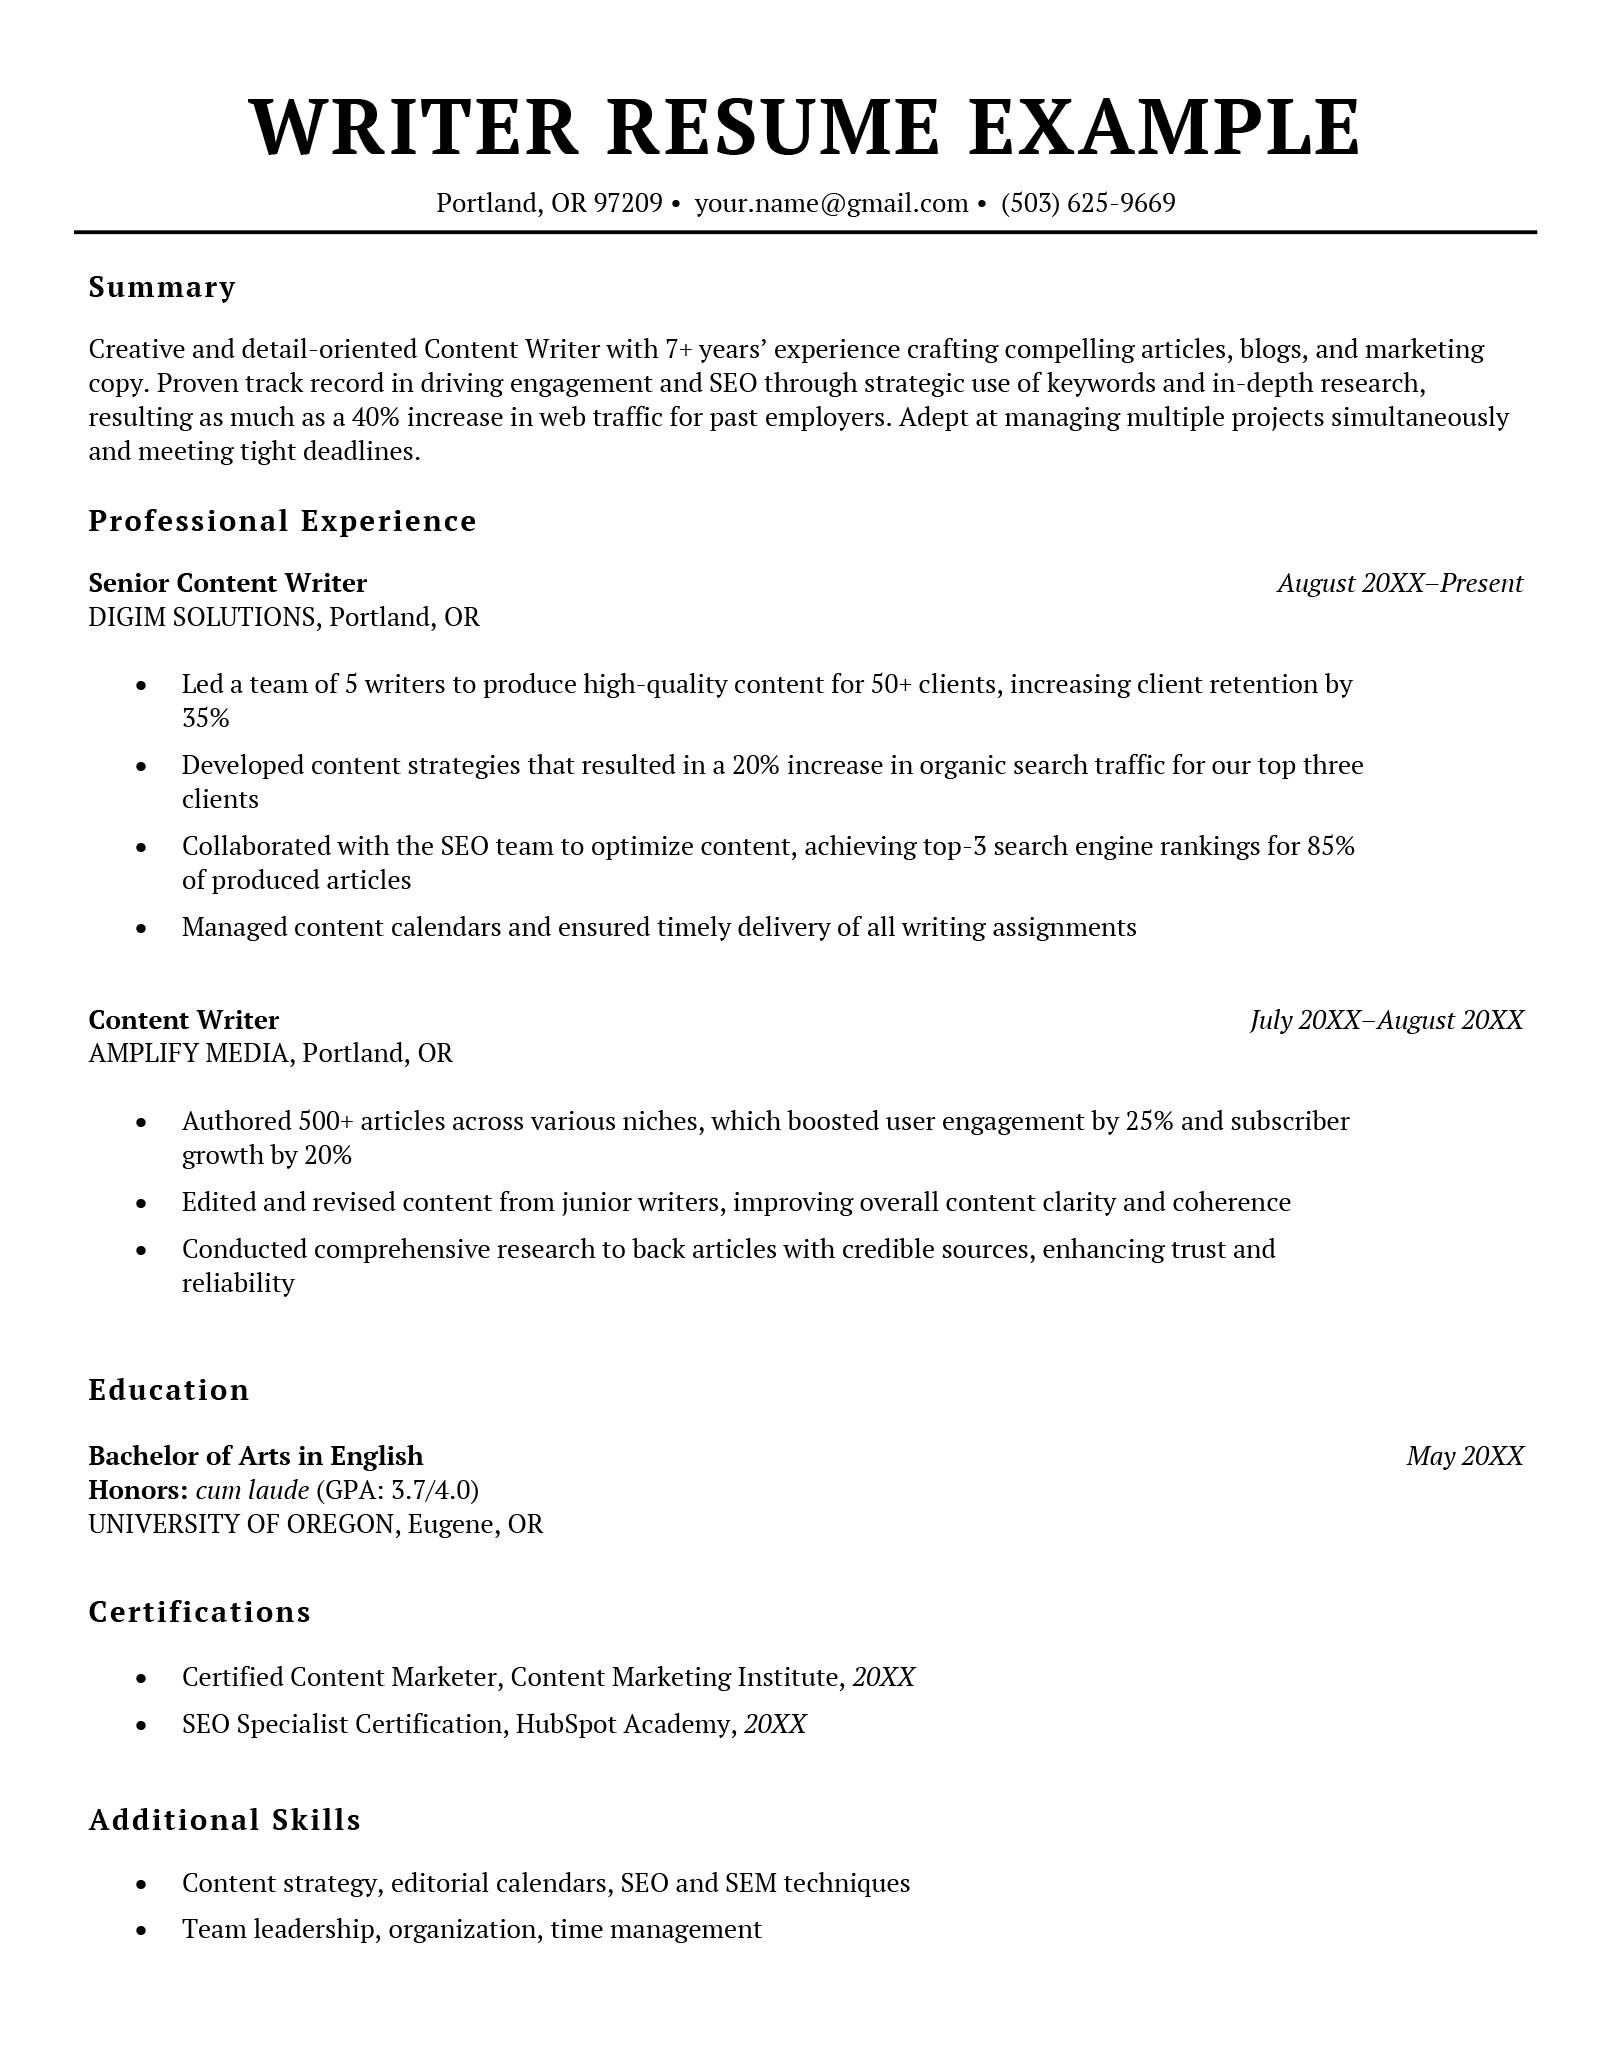 A writer resume example in a simple template with black text